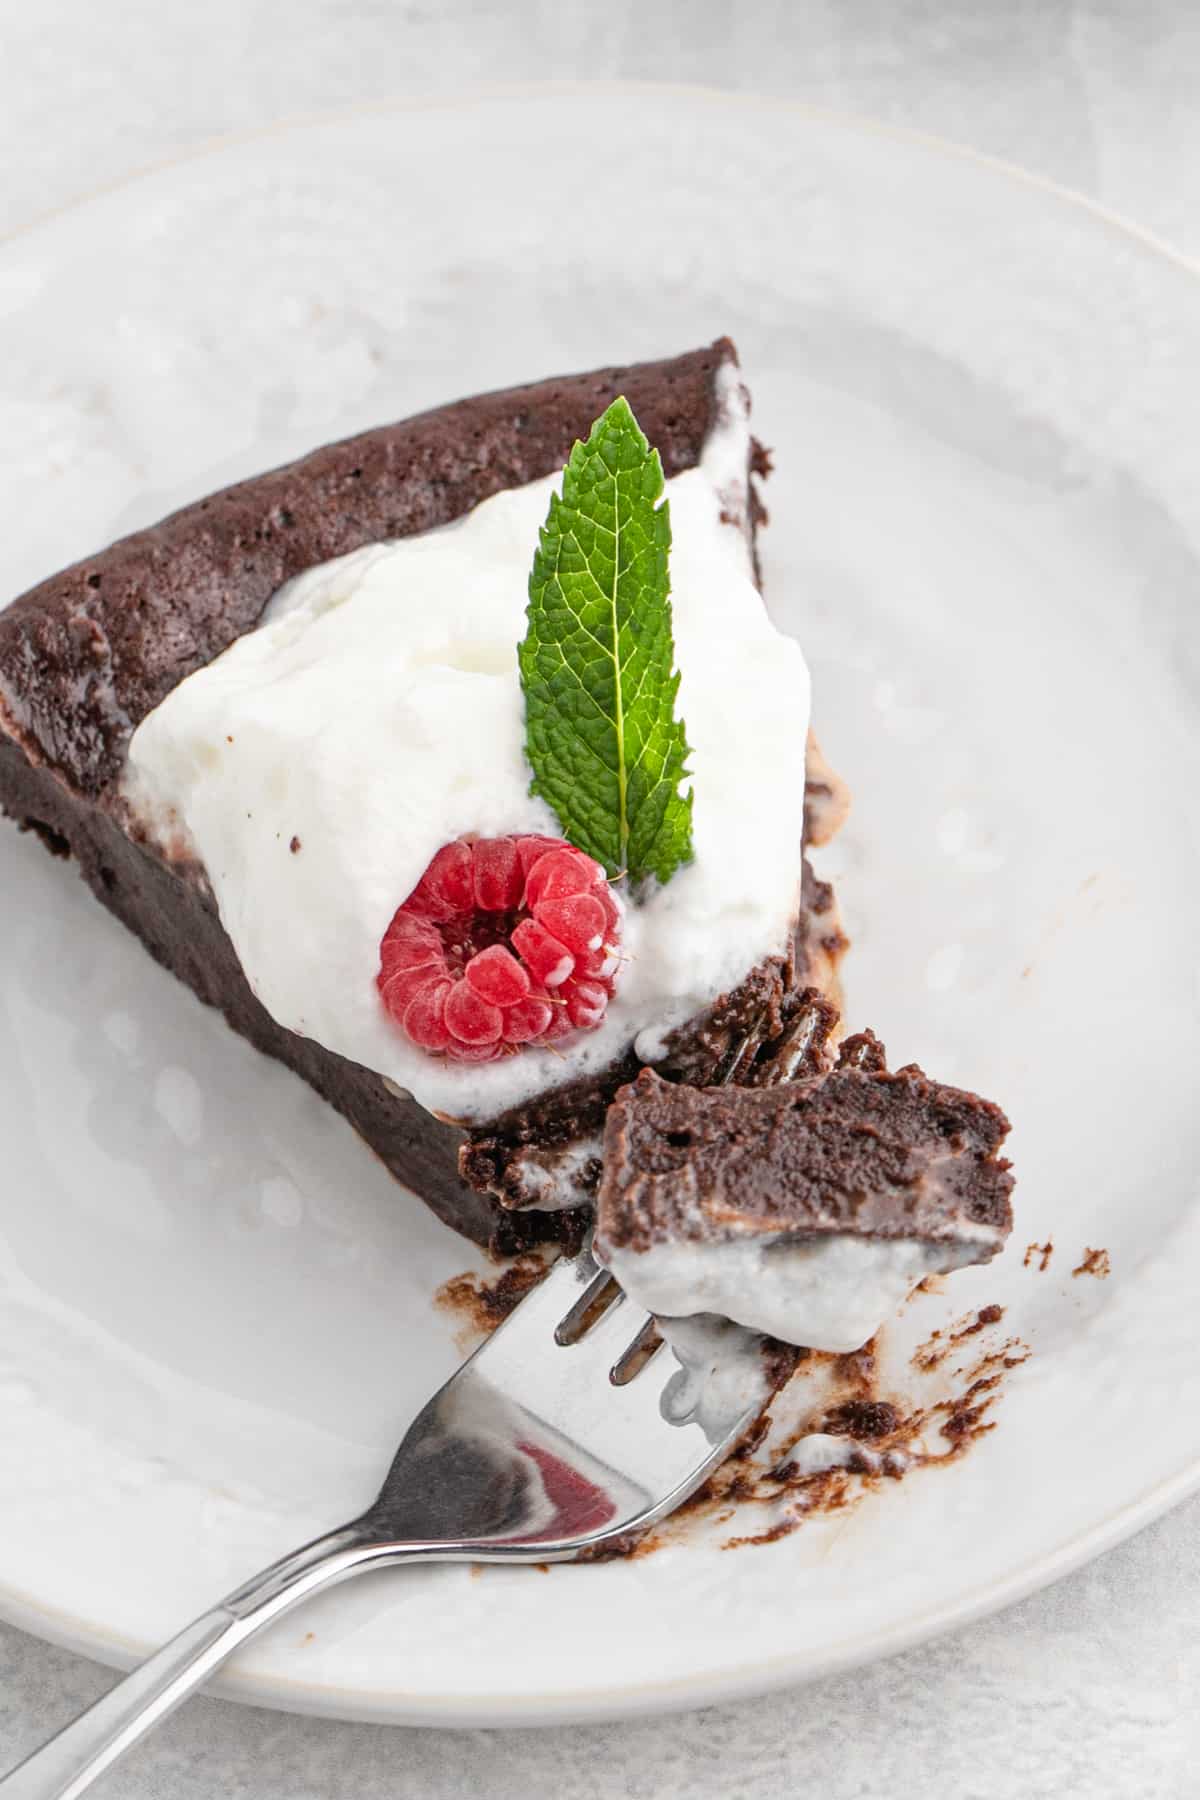 A close up of a slice of chocolate cake being eaten with a fork